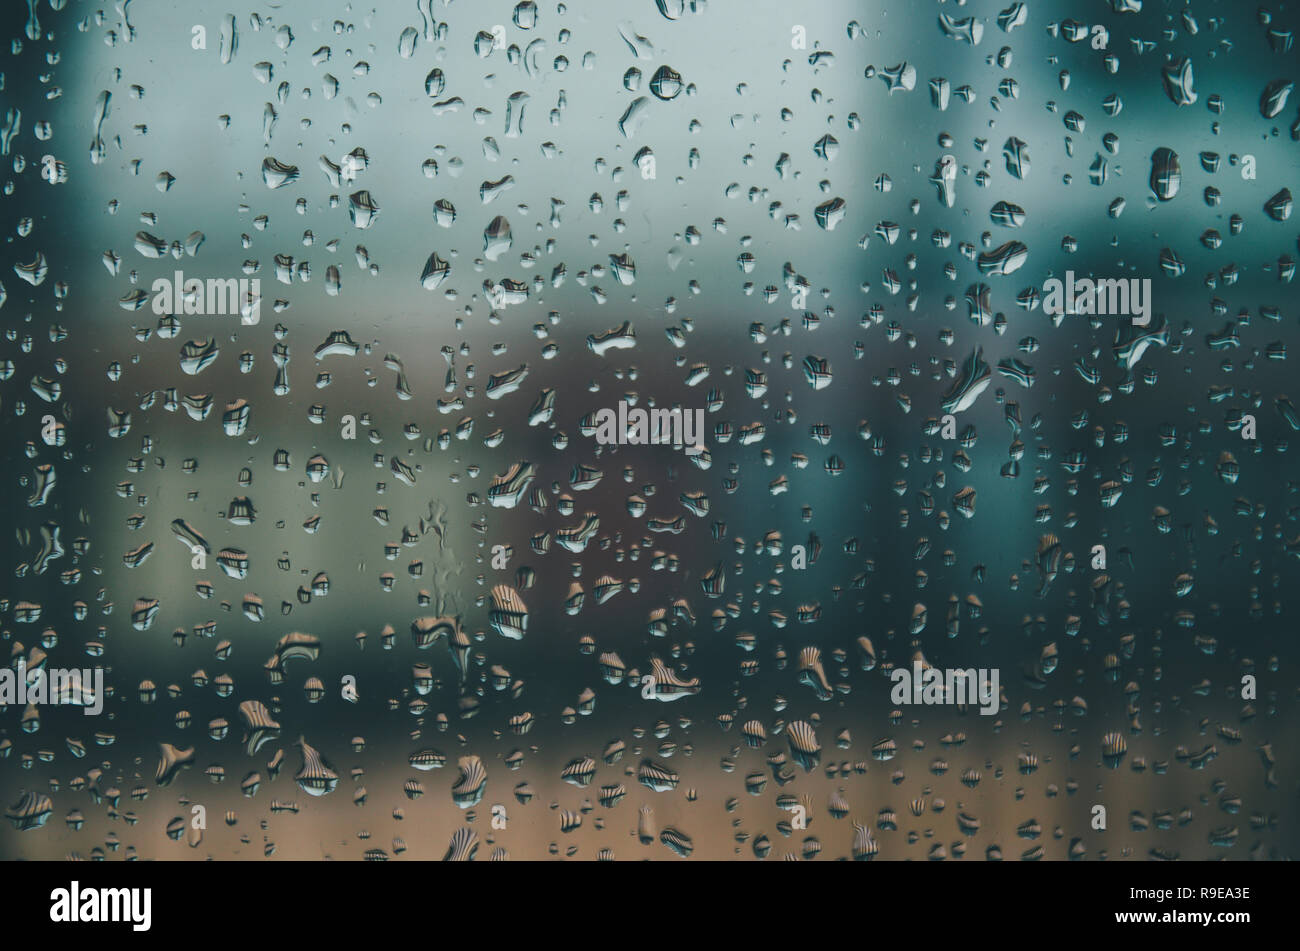 Wallpaper of rain drops or water drops on the glass Vintage